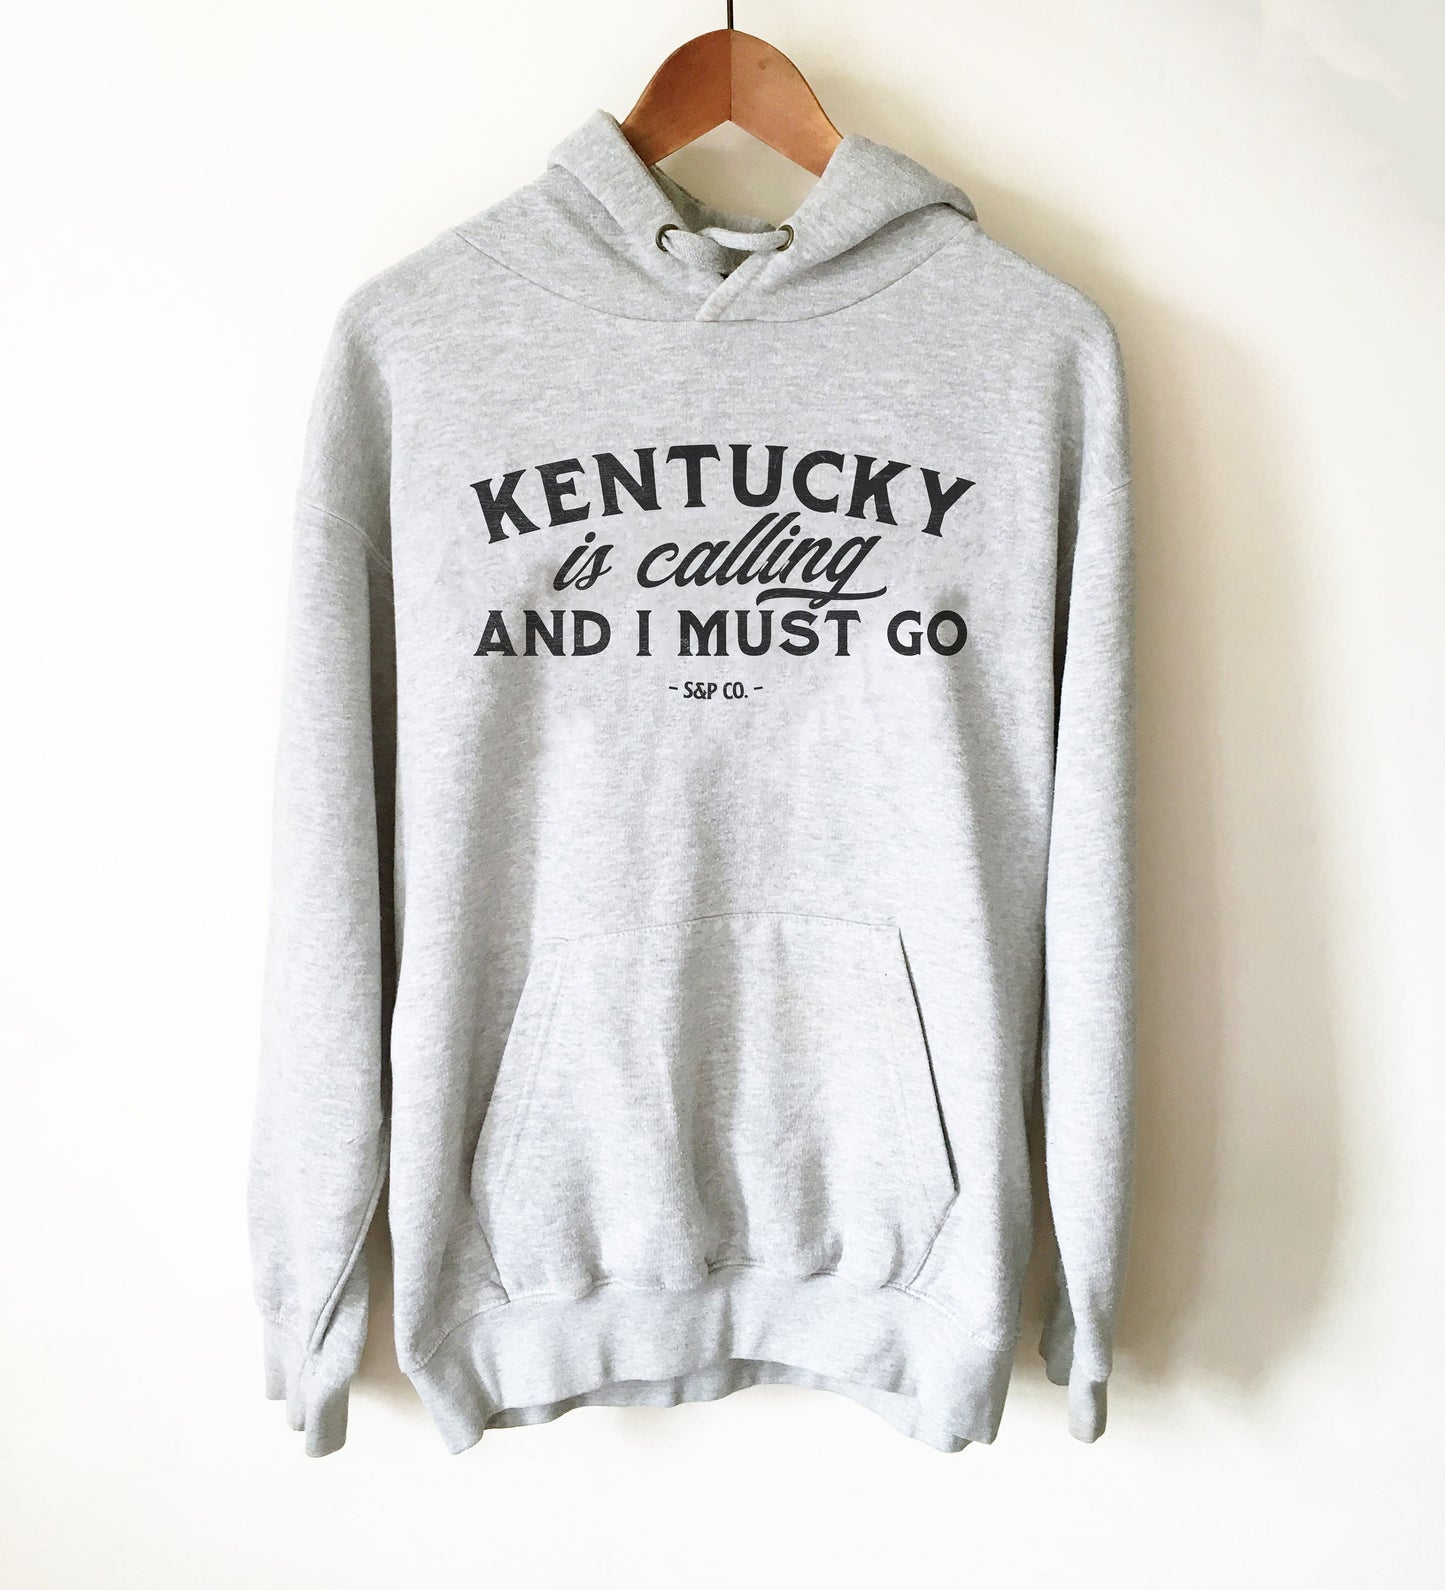 Kentucky Is Calling And I Must Go Hoodie - Kentucky Shirt, Kentucky Gift, Kentucky State Shirt, Kentucky Pride, Southern Shirt